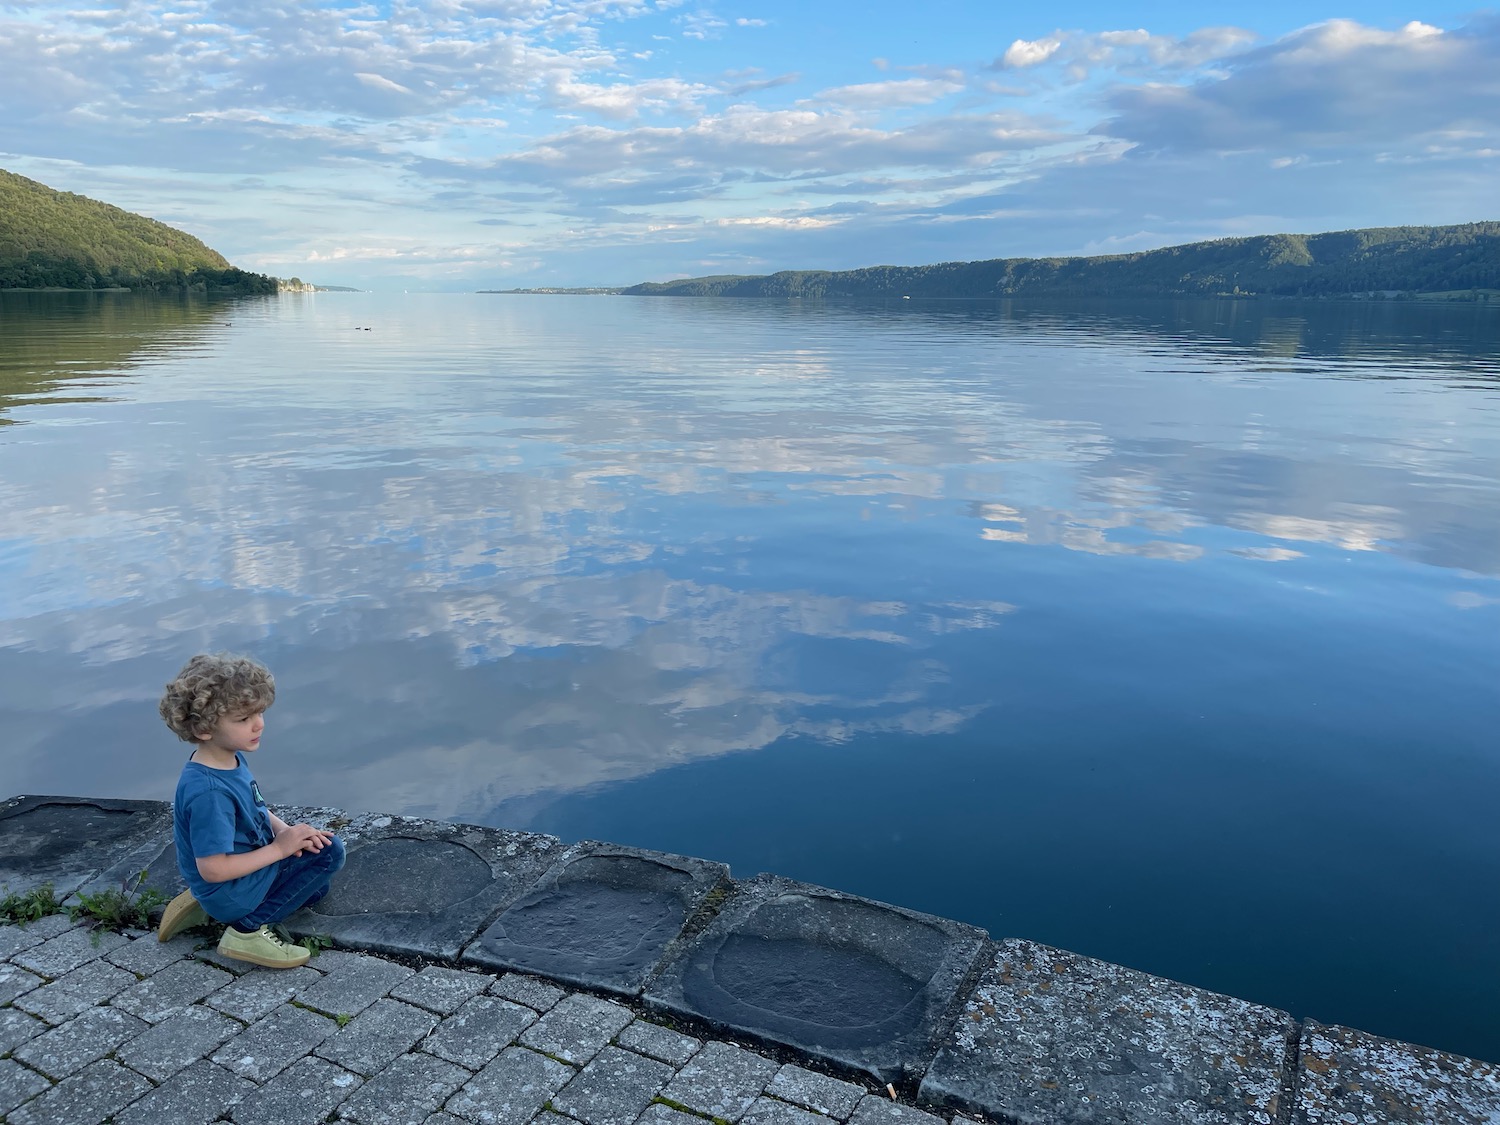 a child sitting on a stone ledge next to a body of water